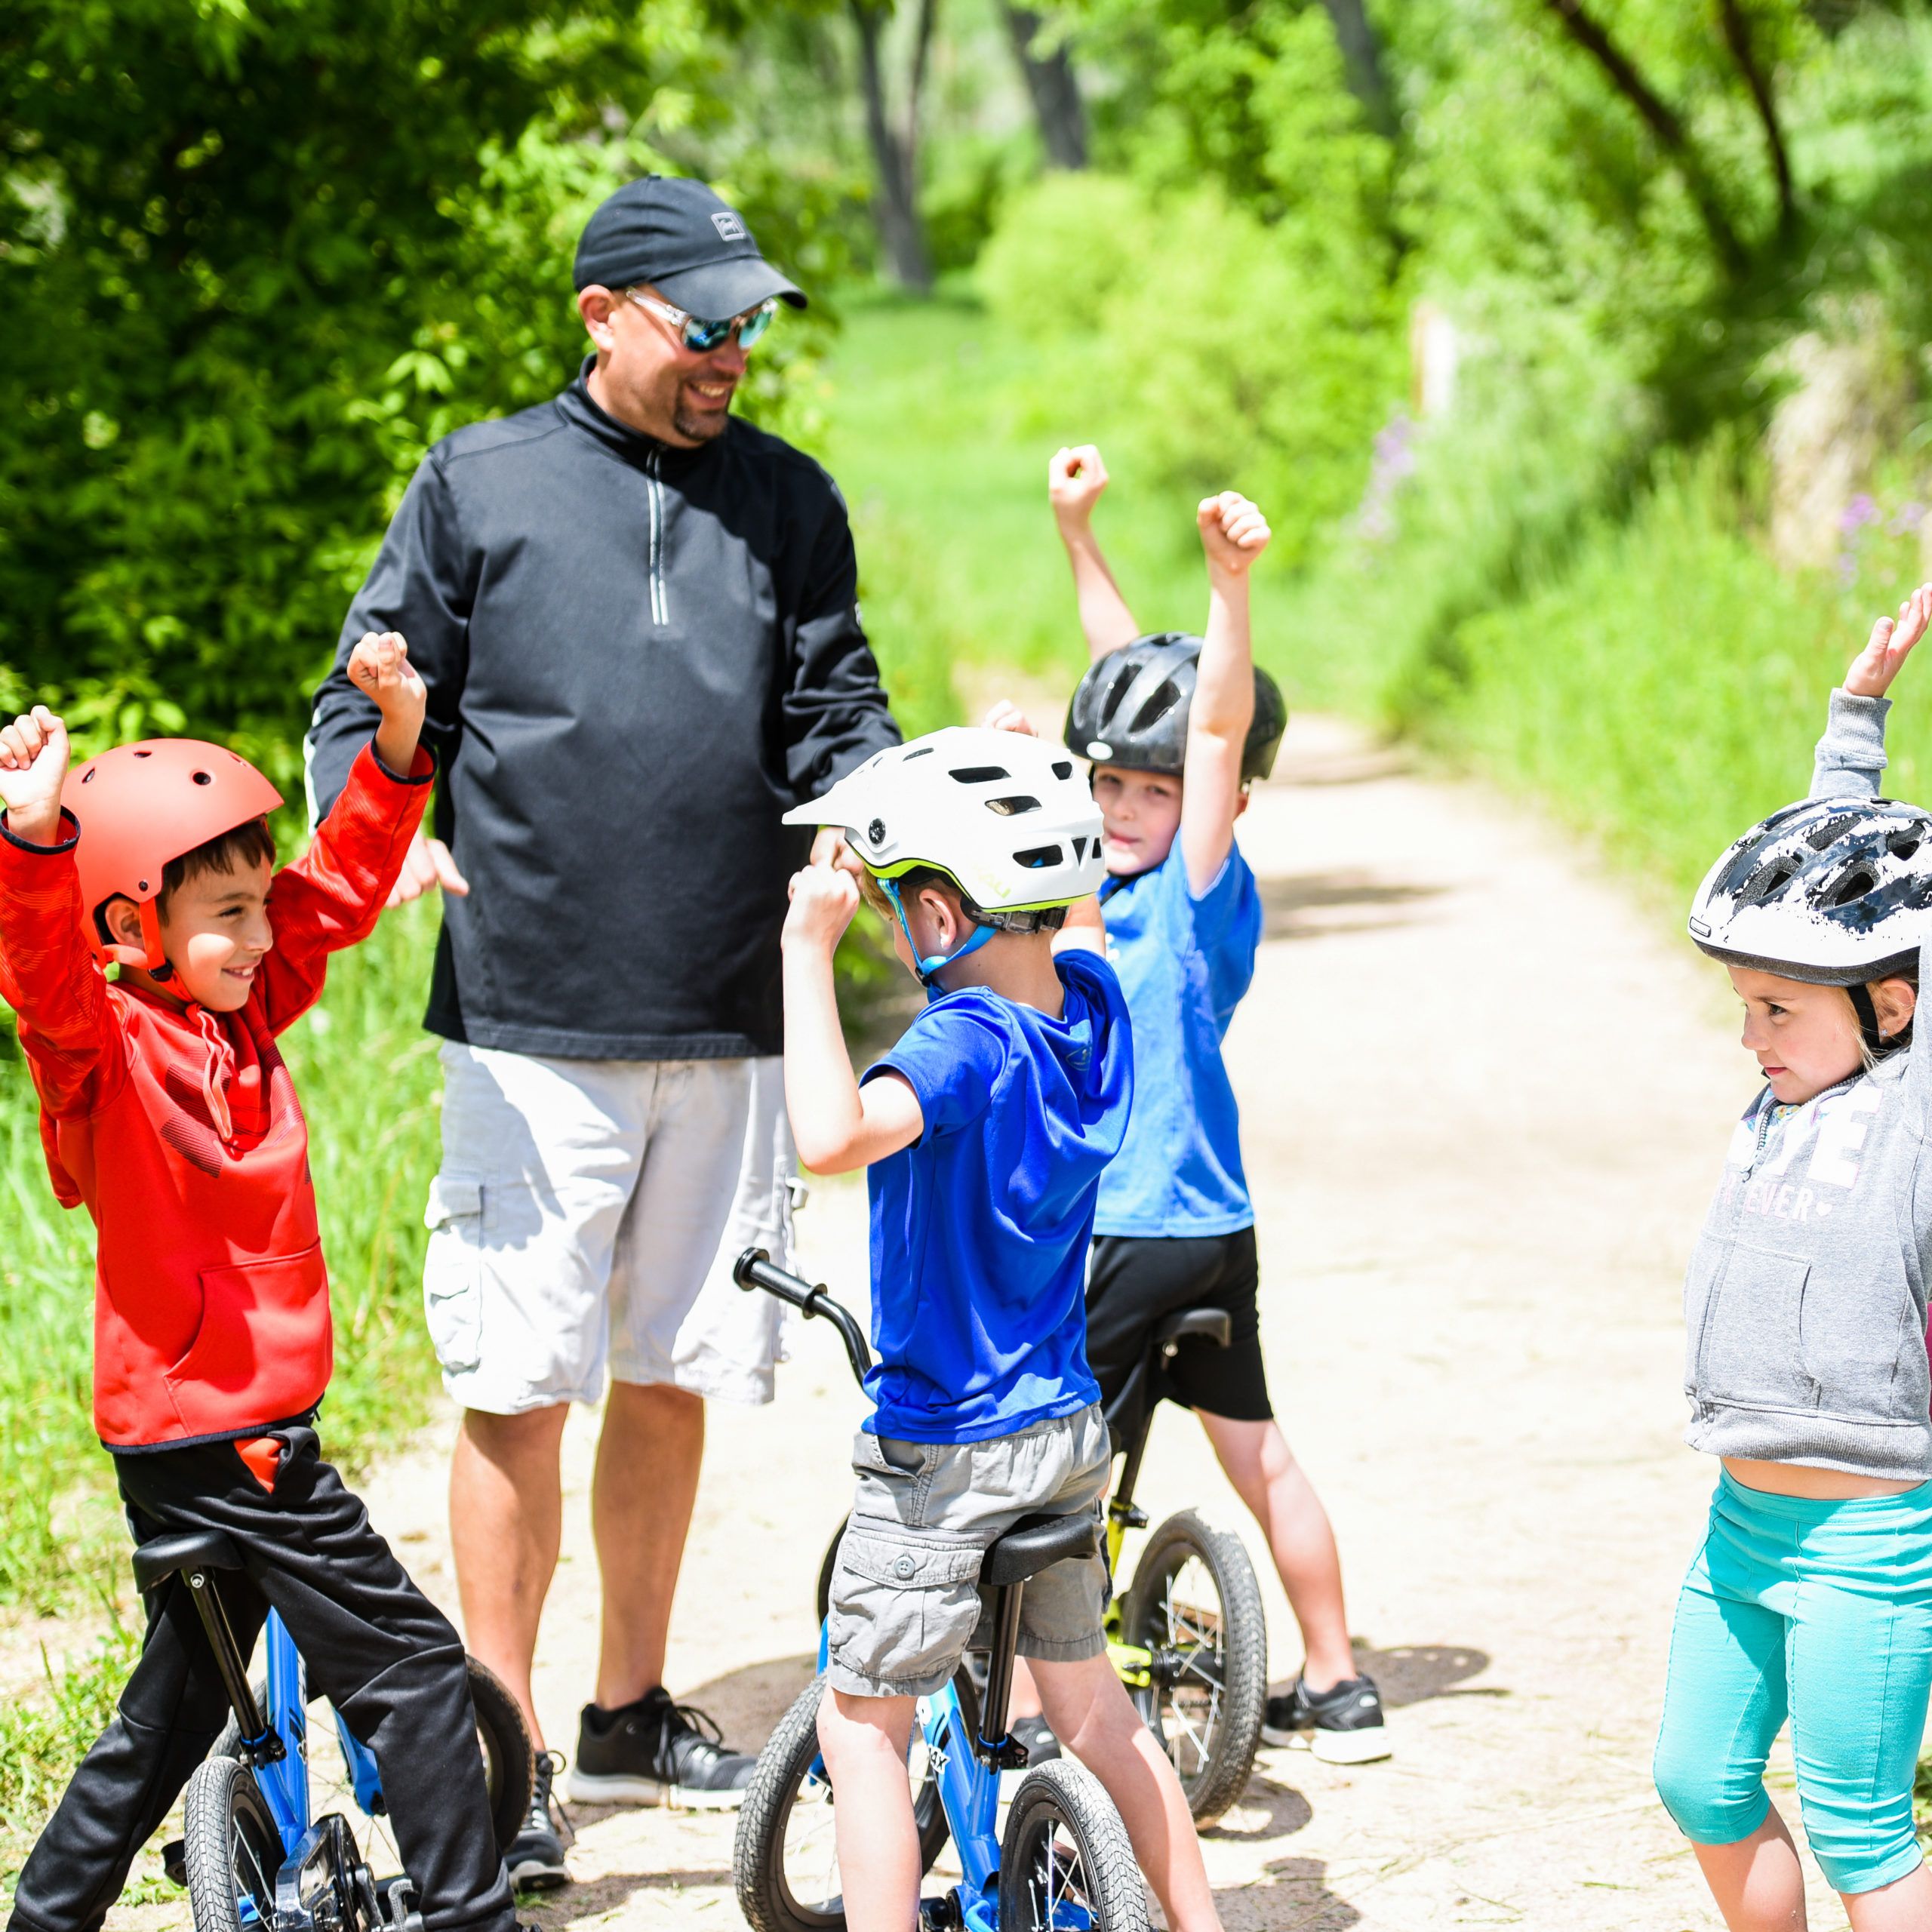 Kids cheering in a group on their bikes with their teacher